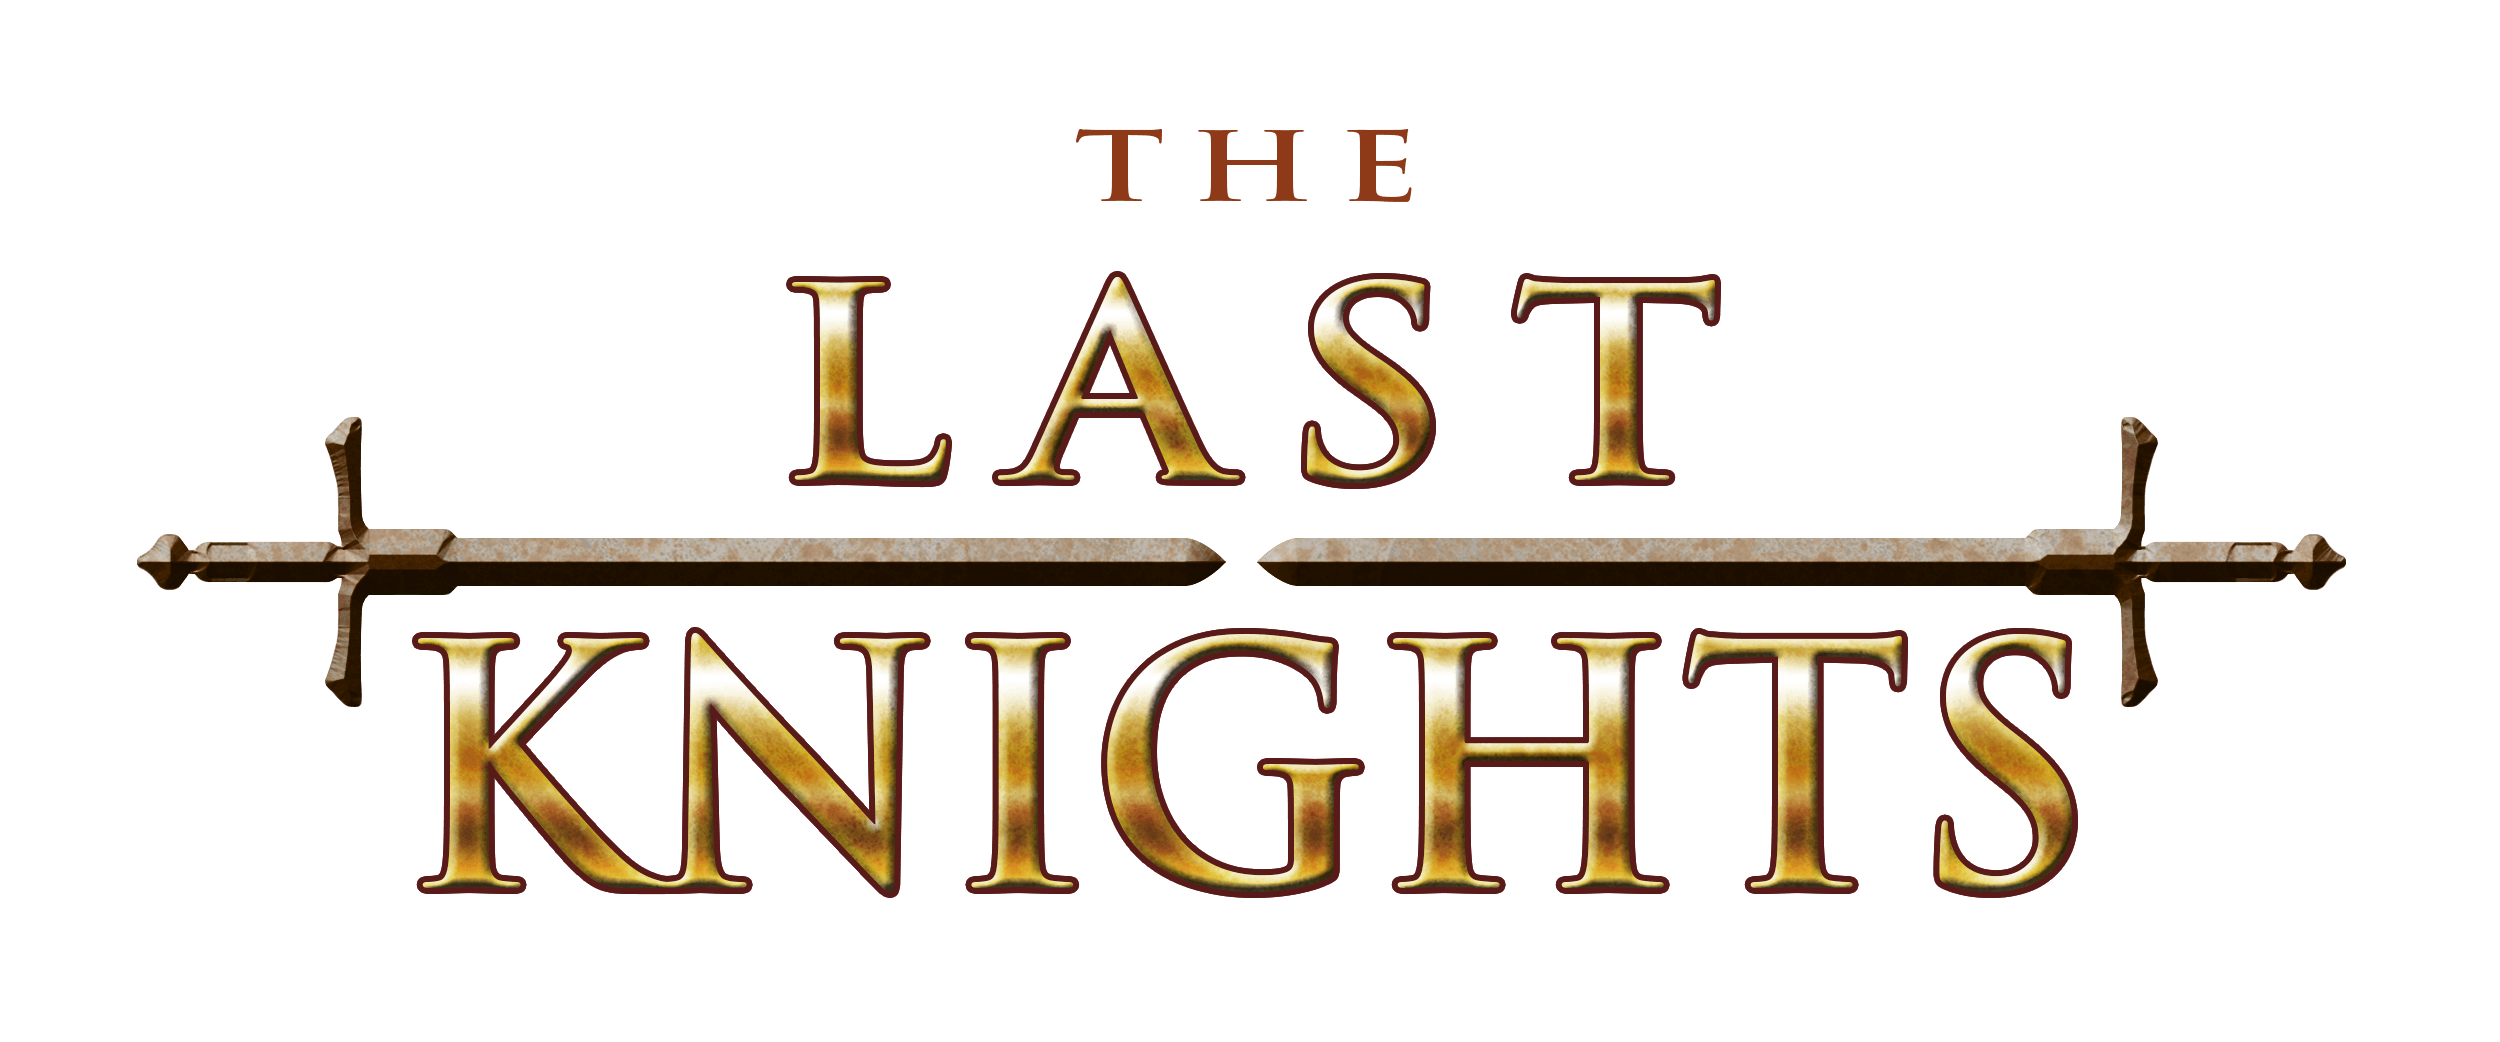 TLK Logo - The Last Knights - Medieval online real time social strategy game ...